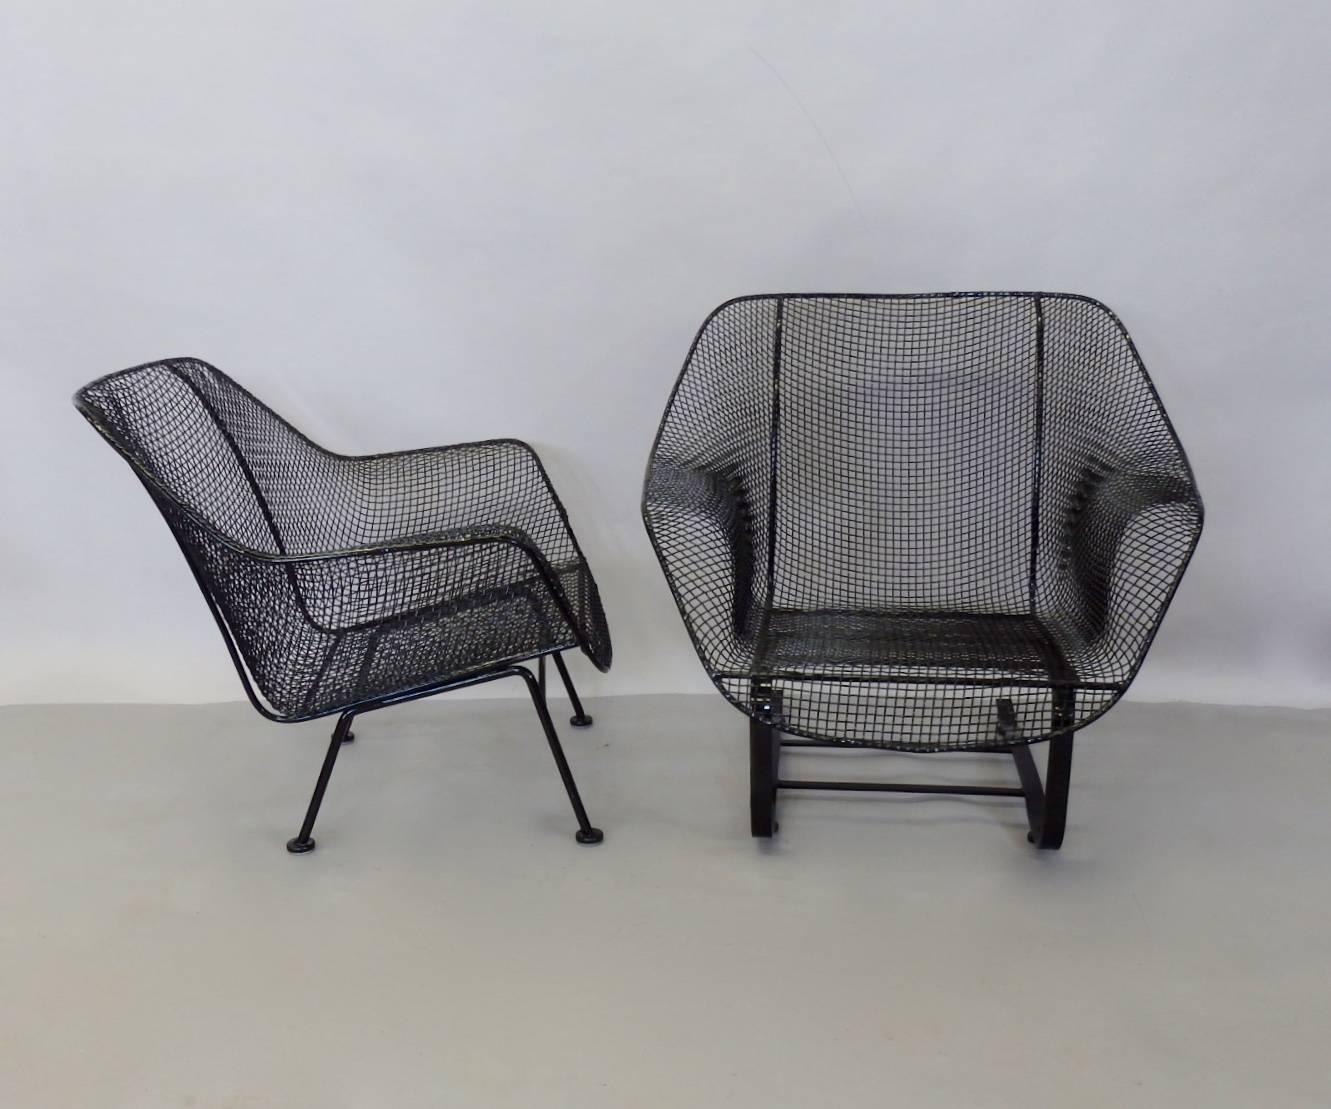 Pair of Woodard large lounge chairs. One springer base one straight leg. Both chairs recently stripped and powder coated in gloss black finish. New glides added to each base.